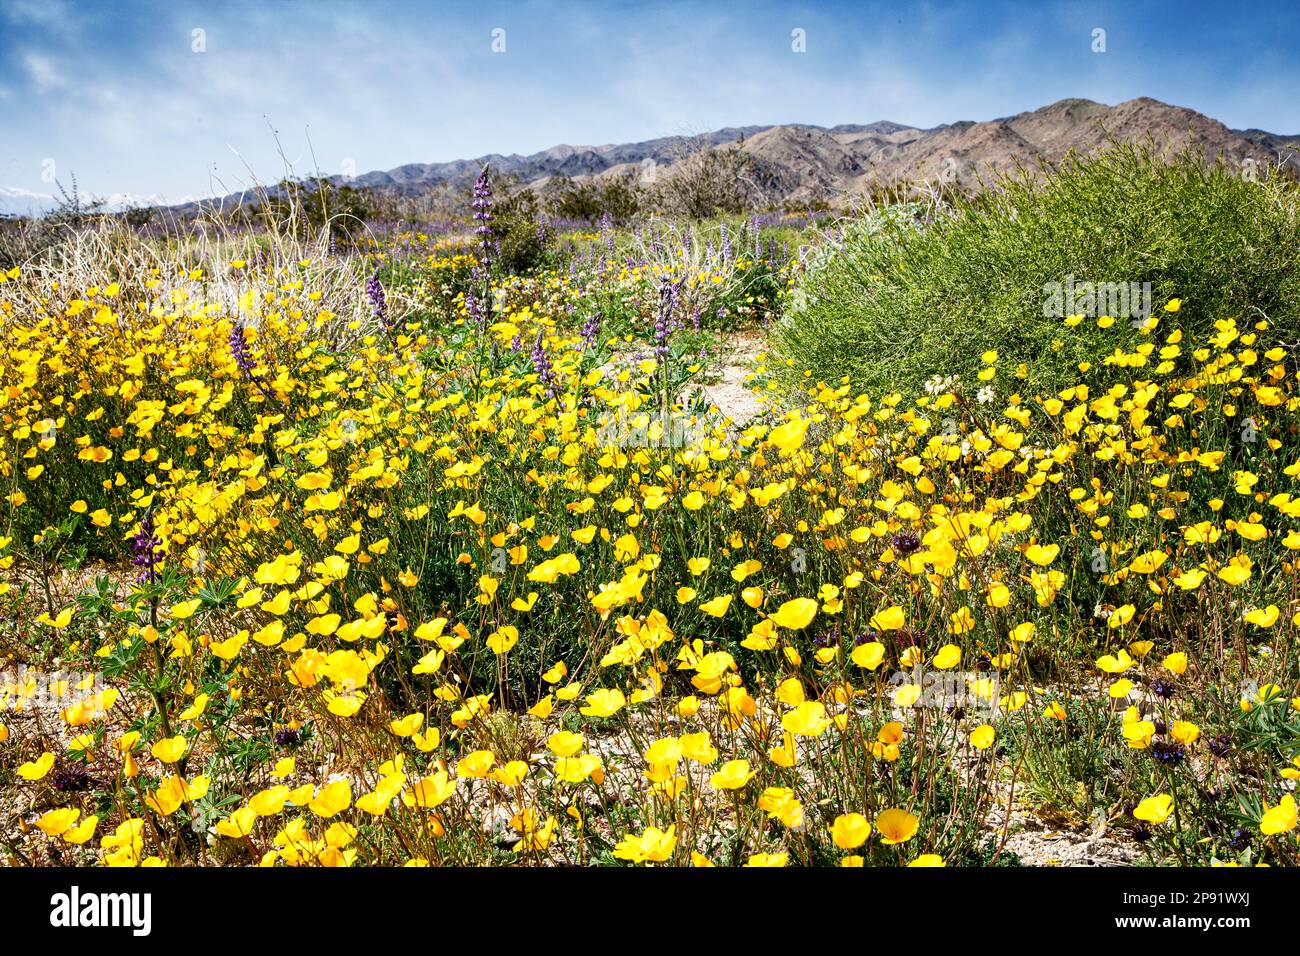 Wildflower blooms (yellow cups, lupine), in the lower elevations of Joshua Tree National Park, California. Stock Photo